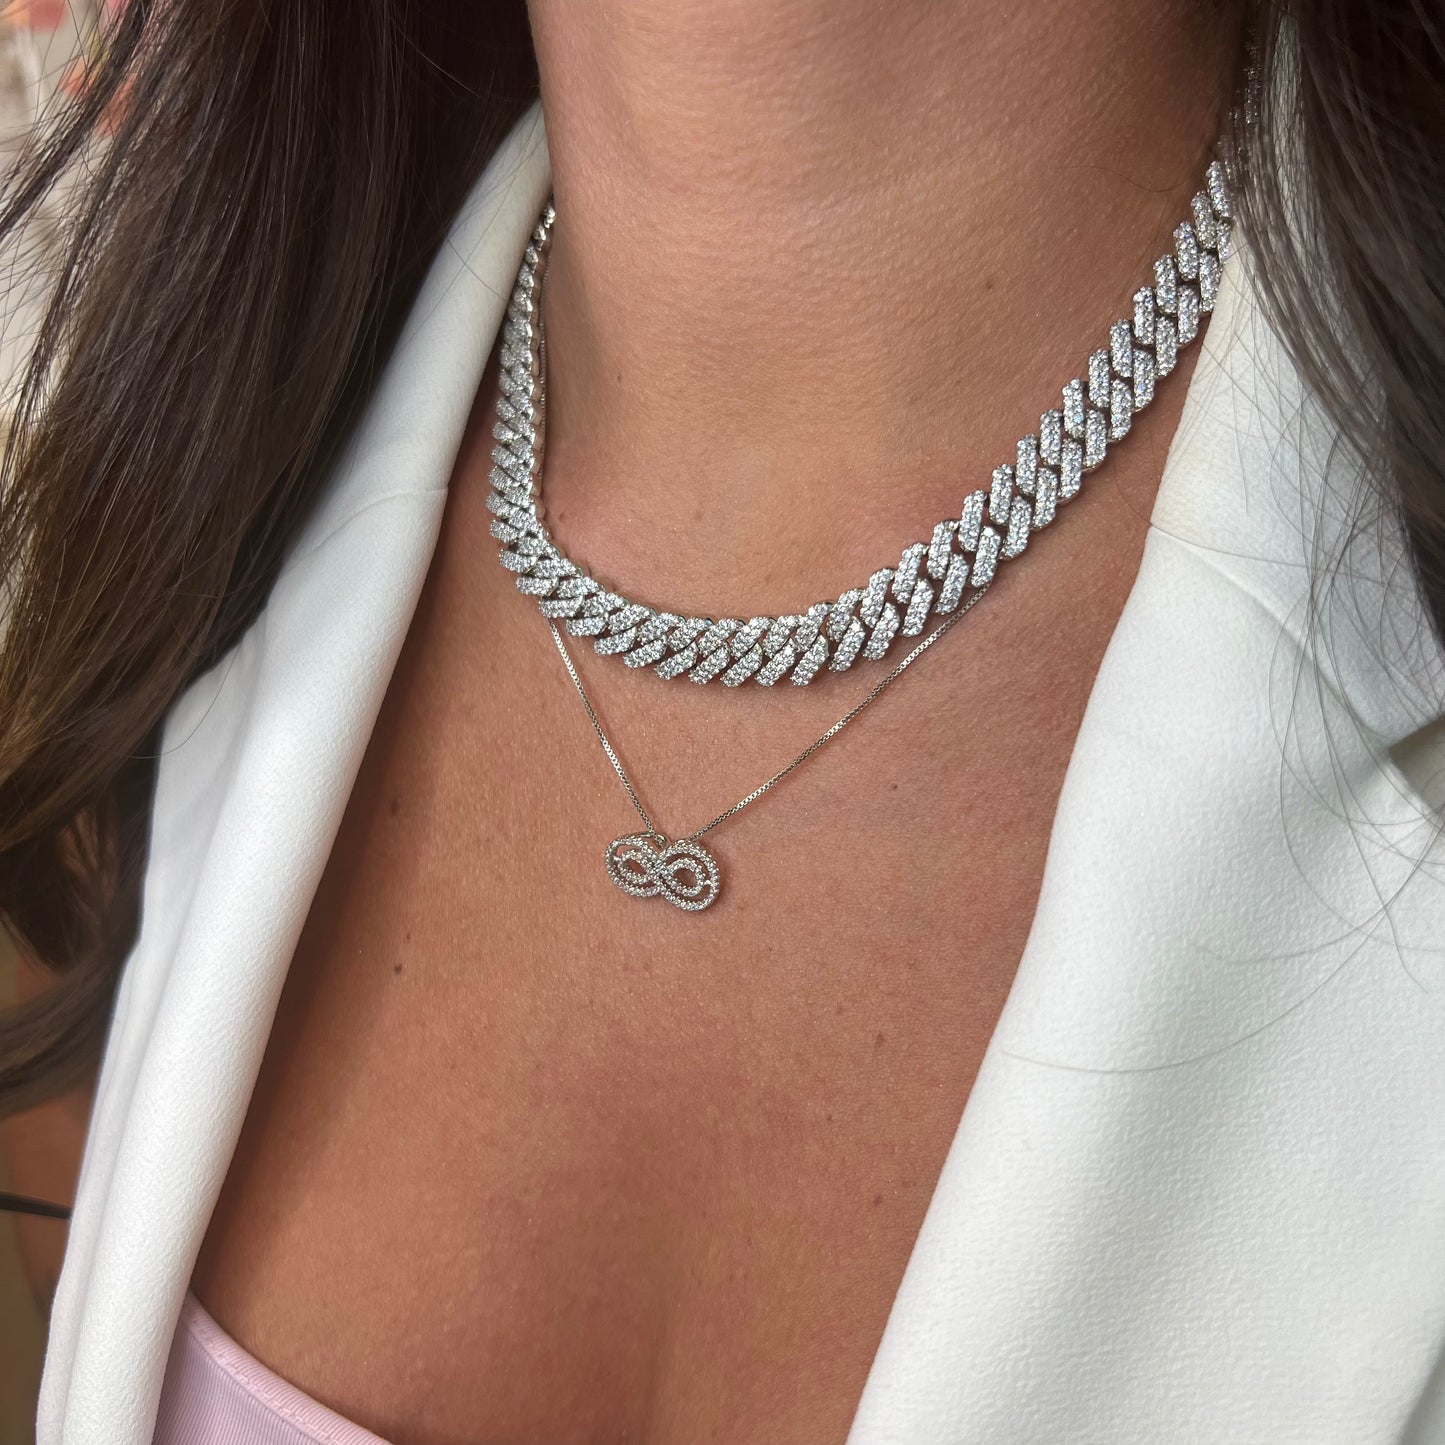 NEW CUBAN LINKS NECKLACE | White Rhodium Plated